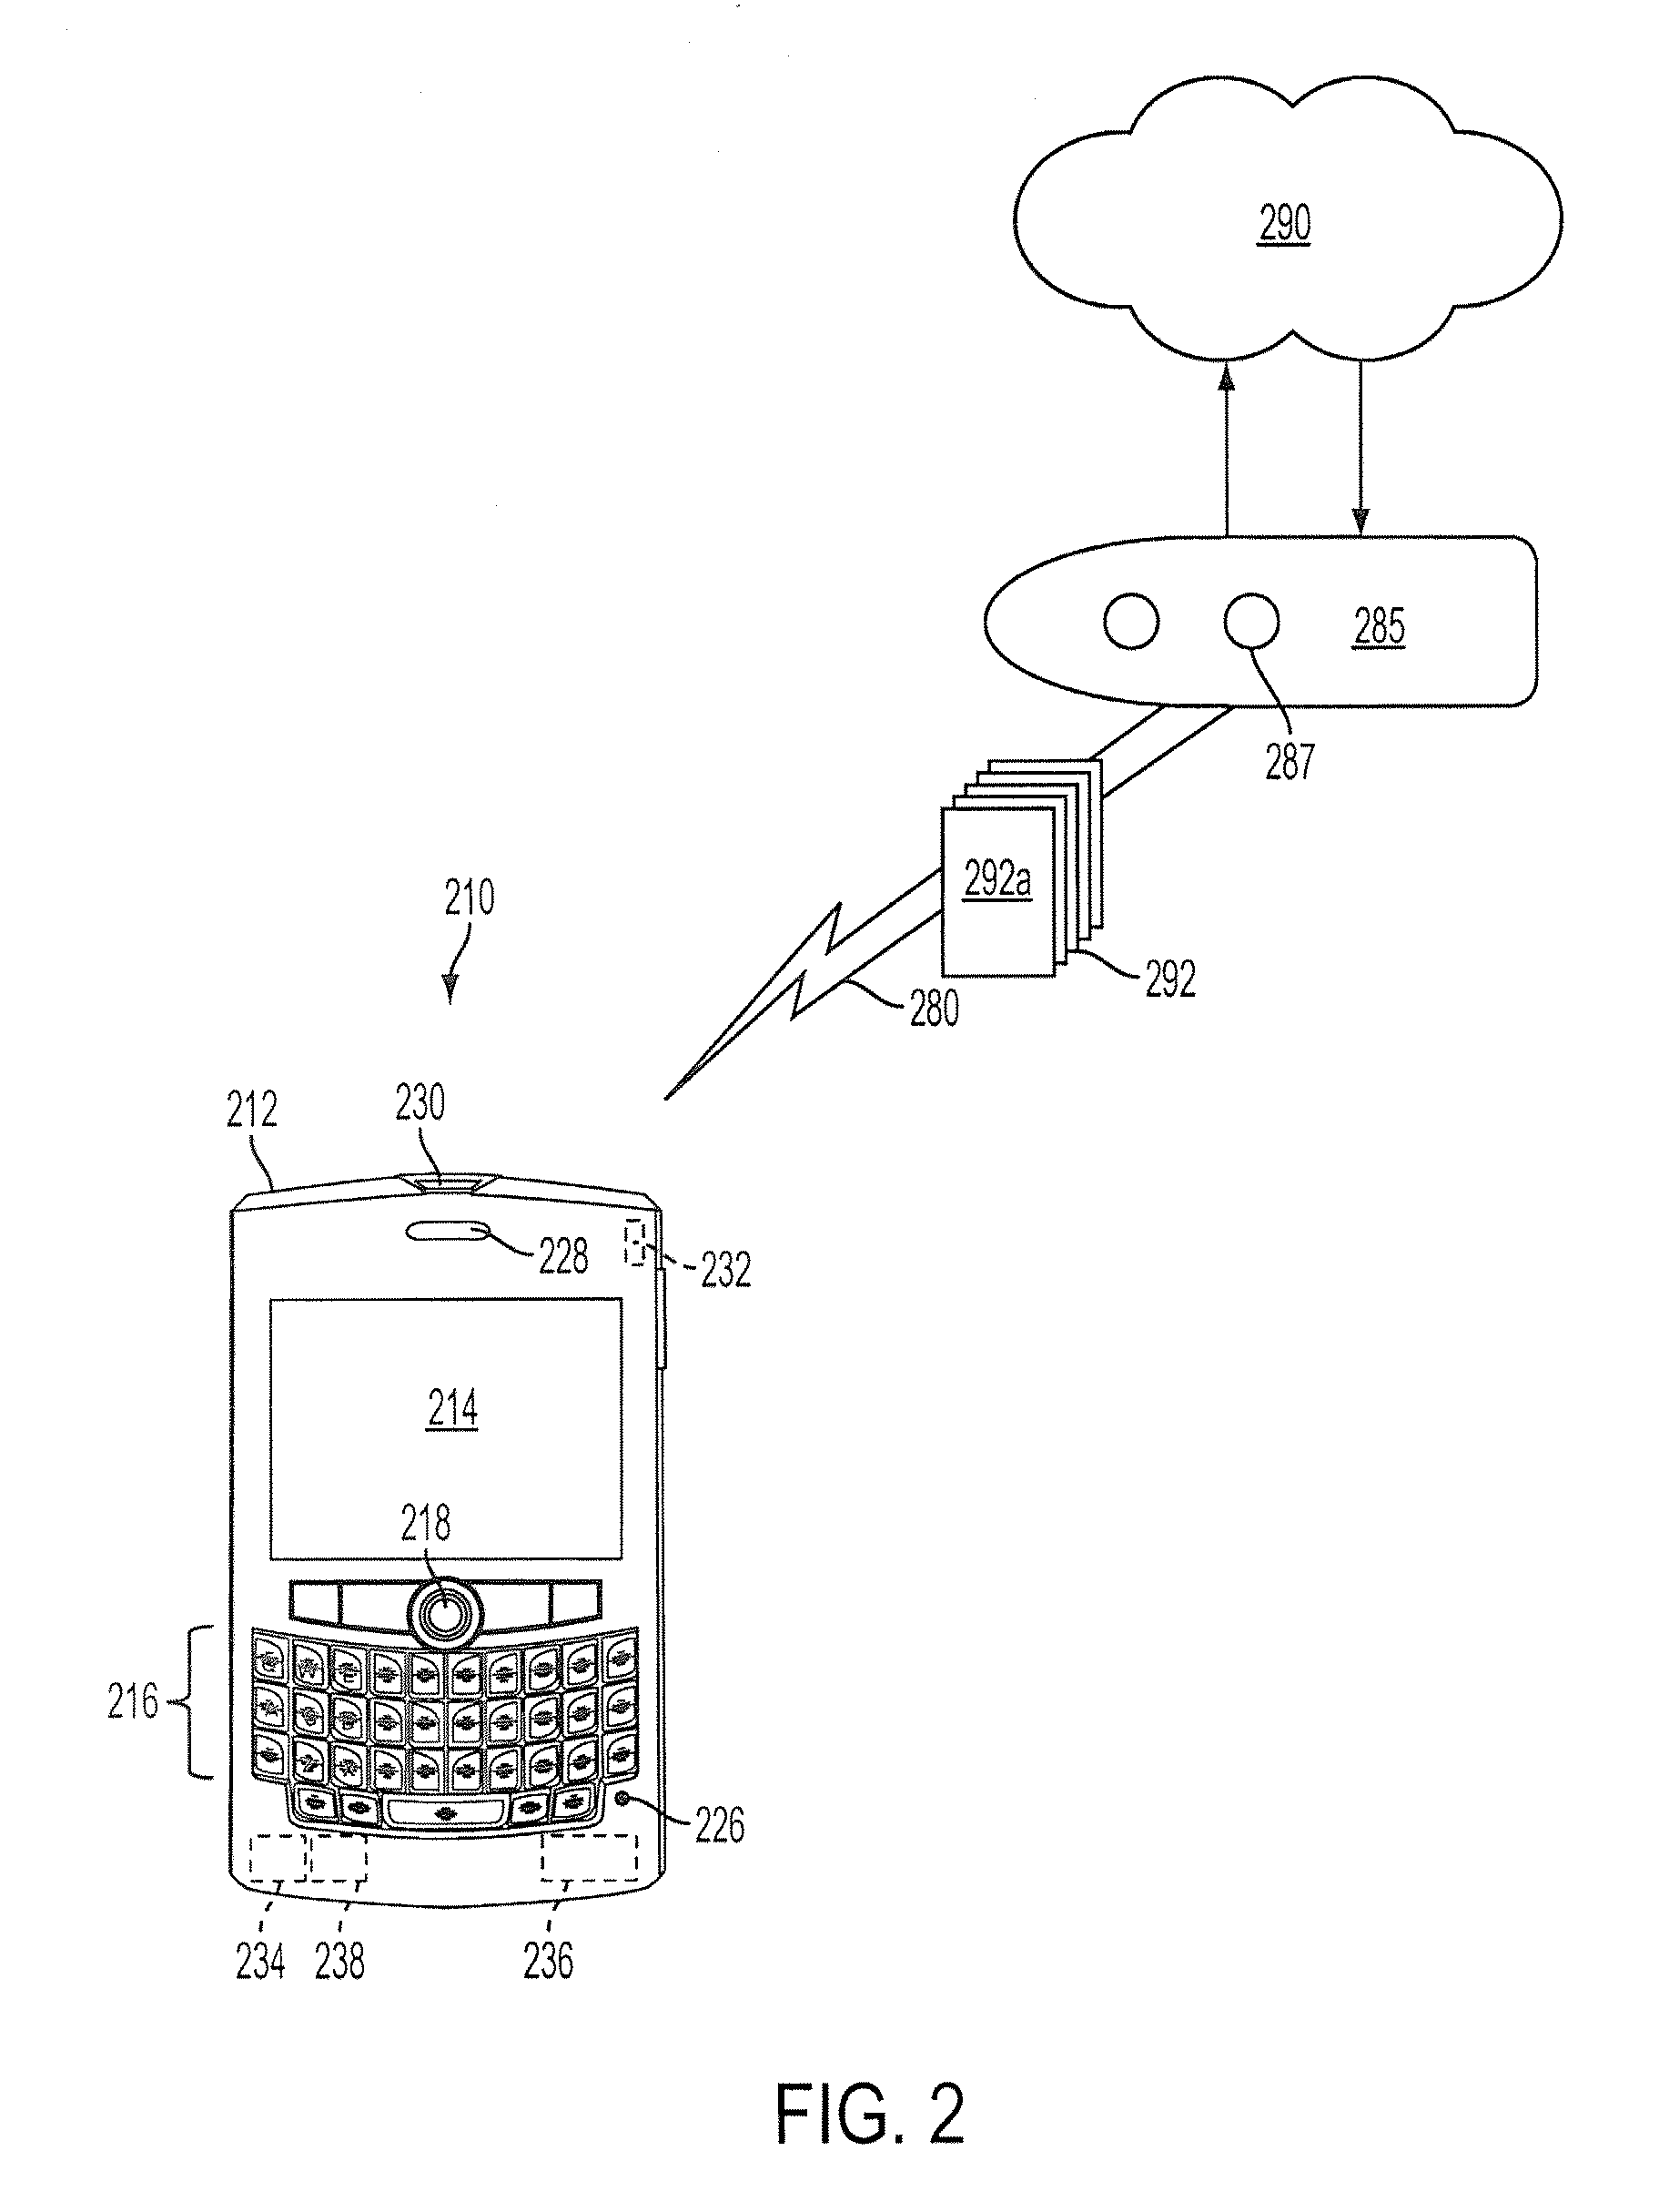 Method and apparatus for braille input on a portable electronic device